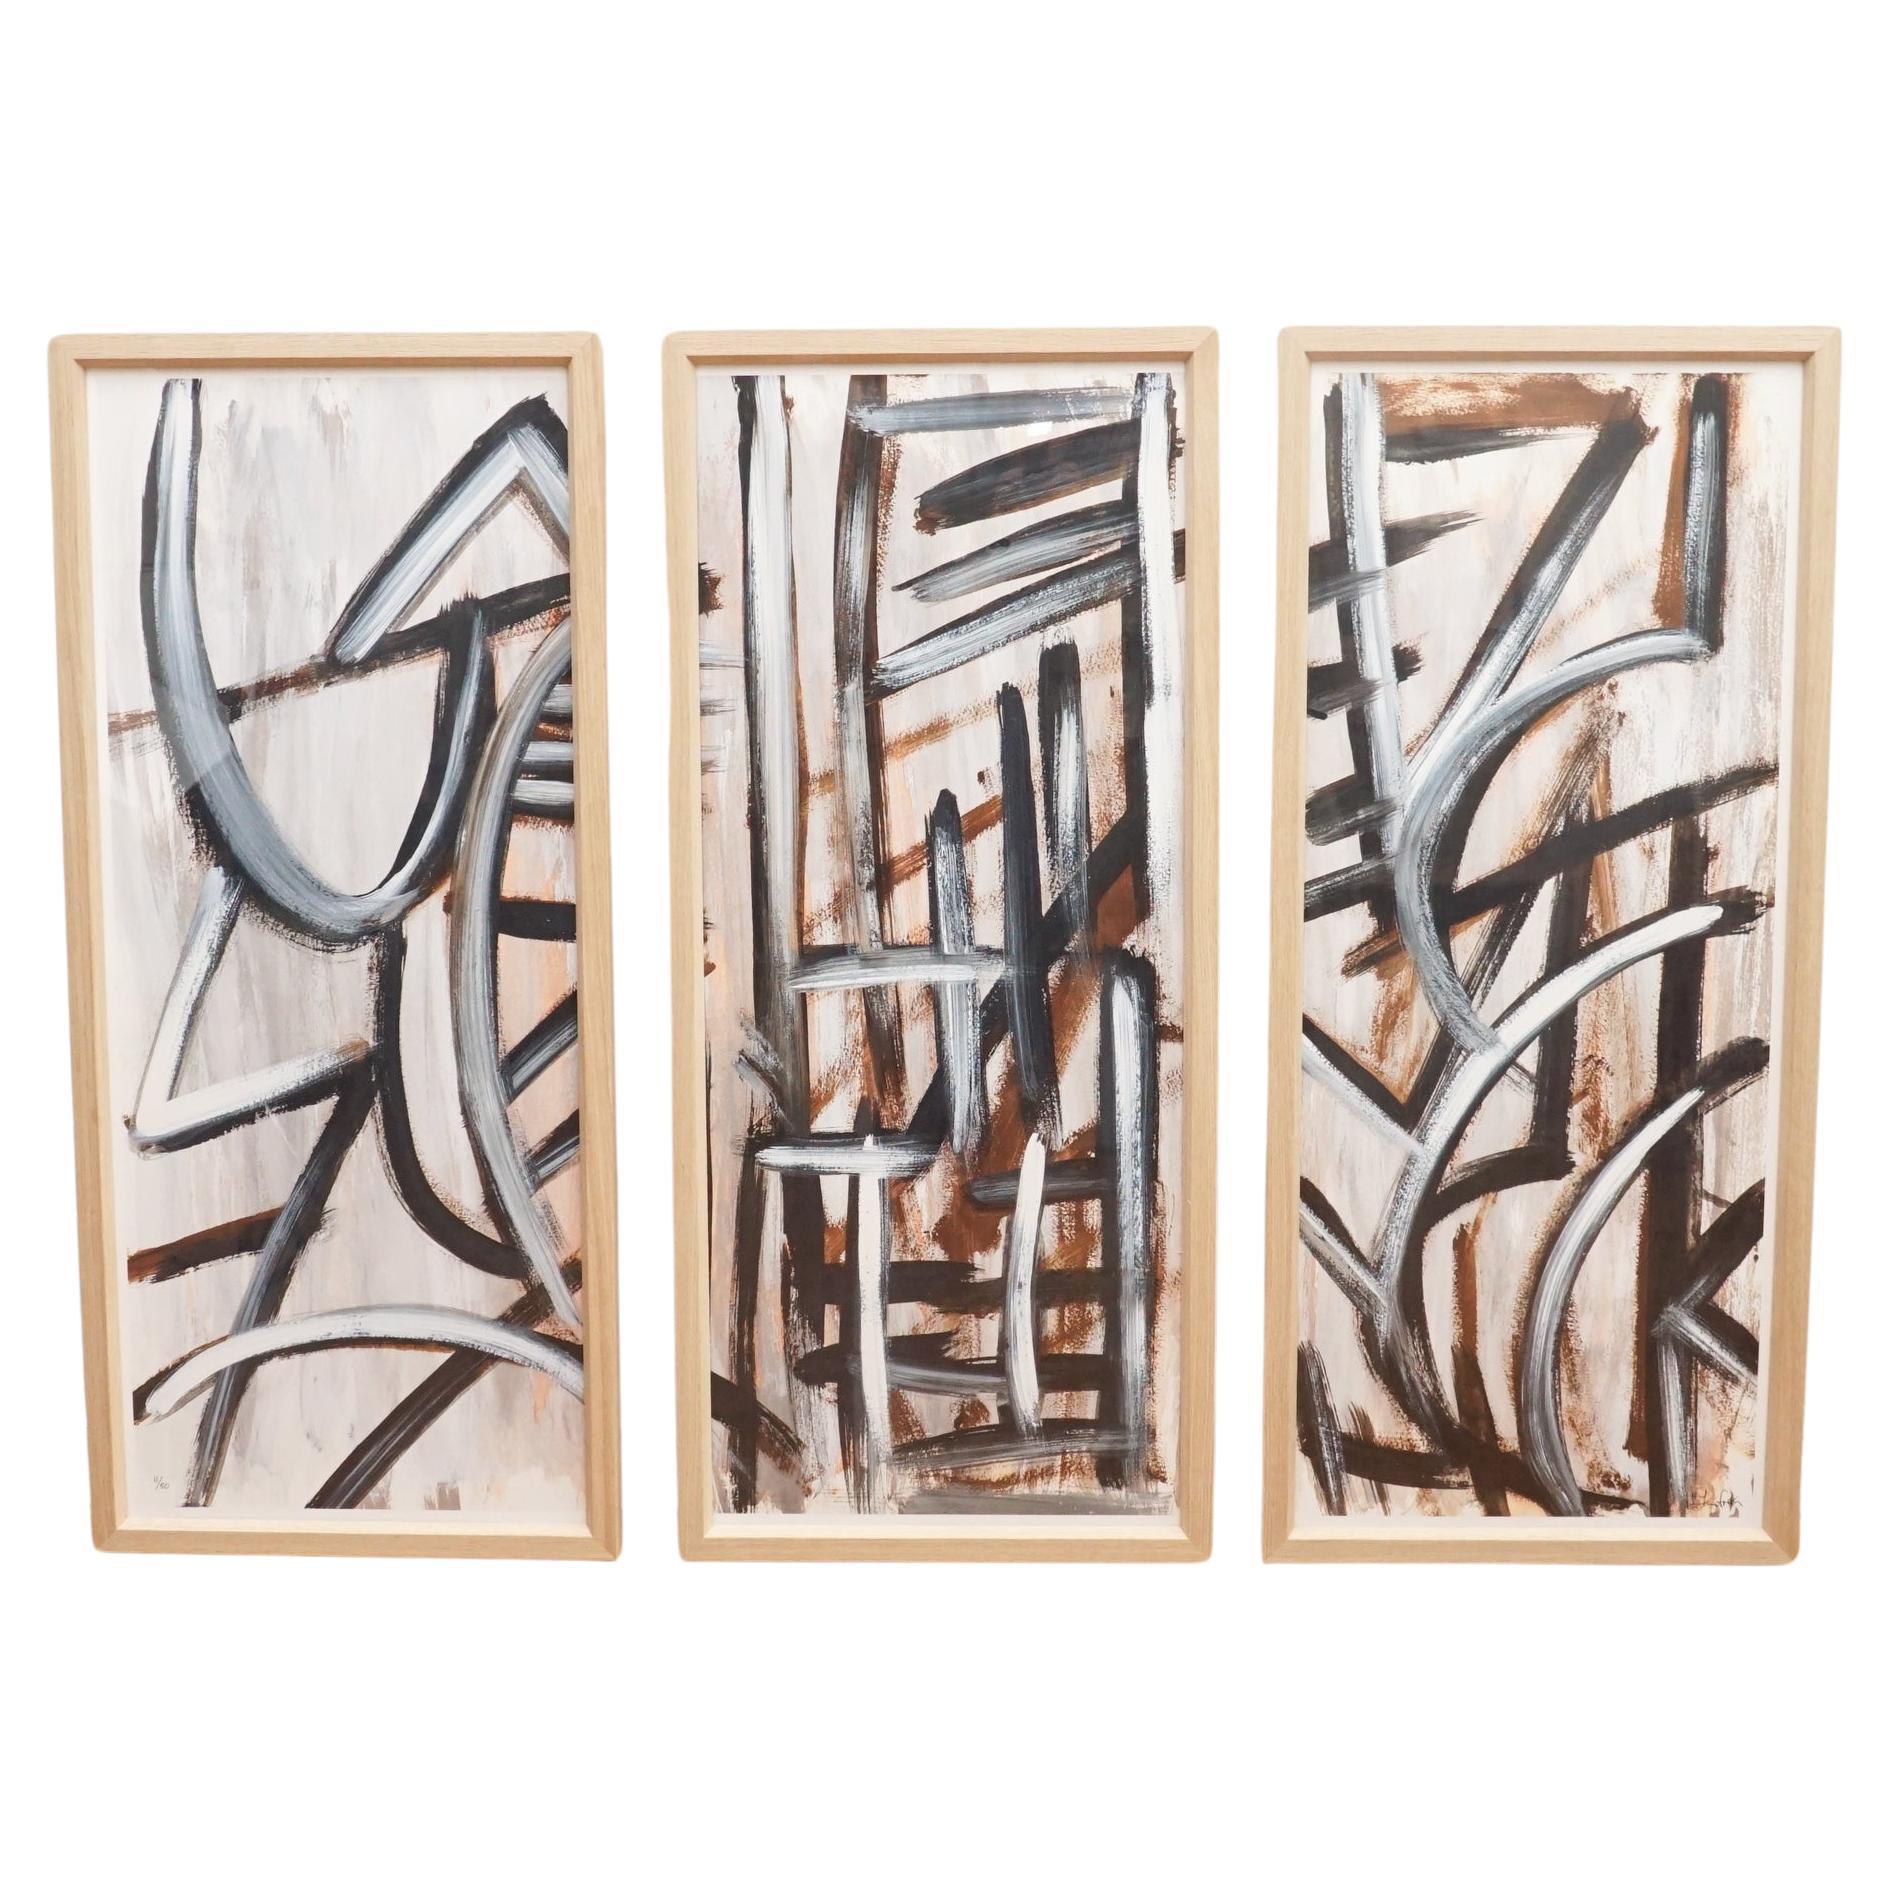 Abstract art "Earthbeat" Triptych by Jan Erika